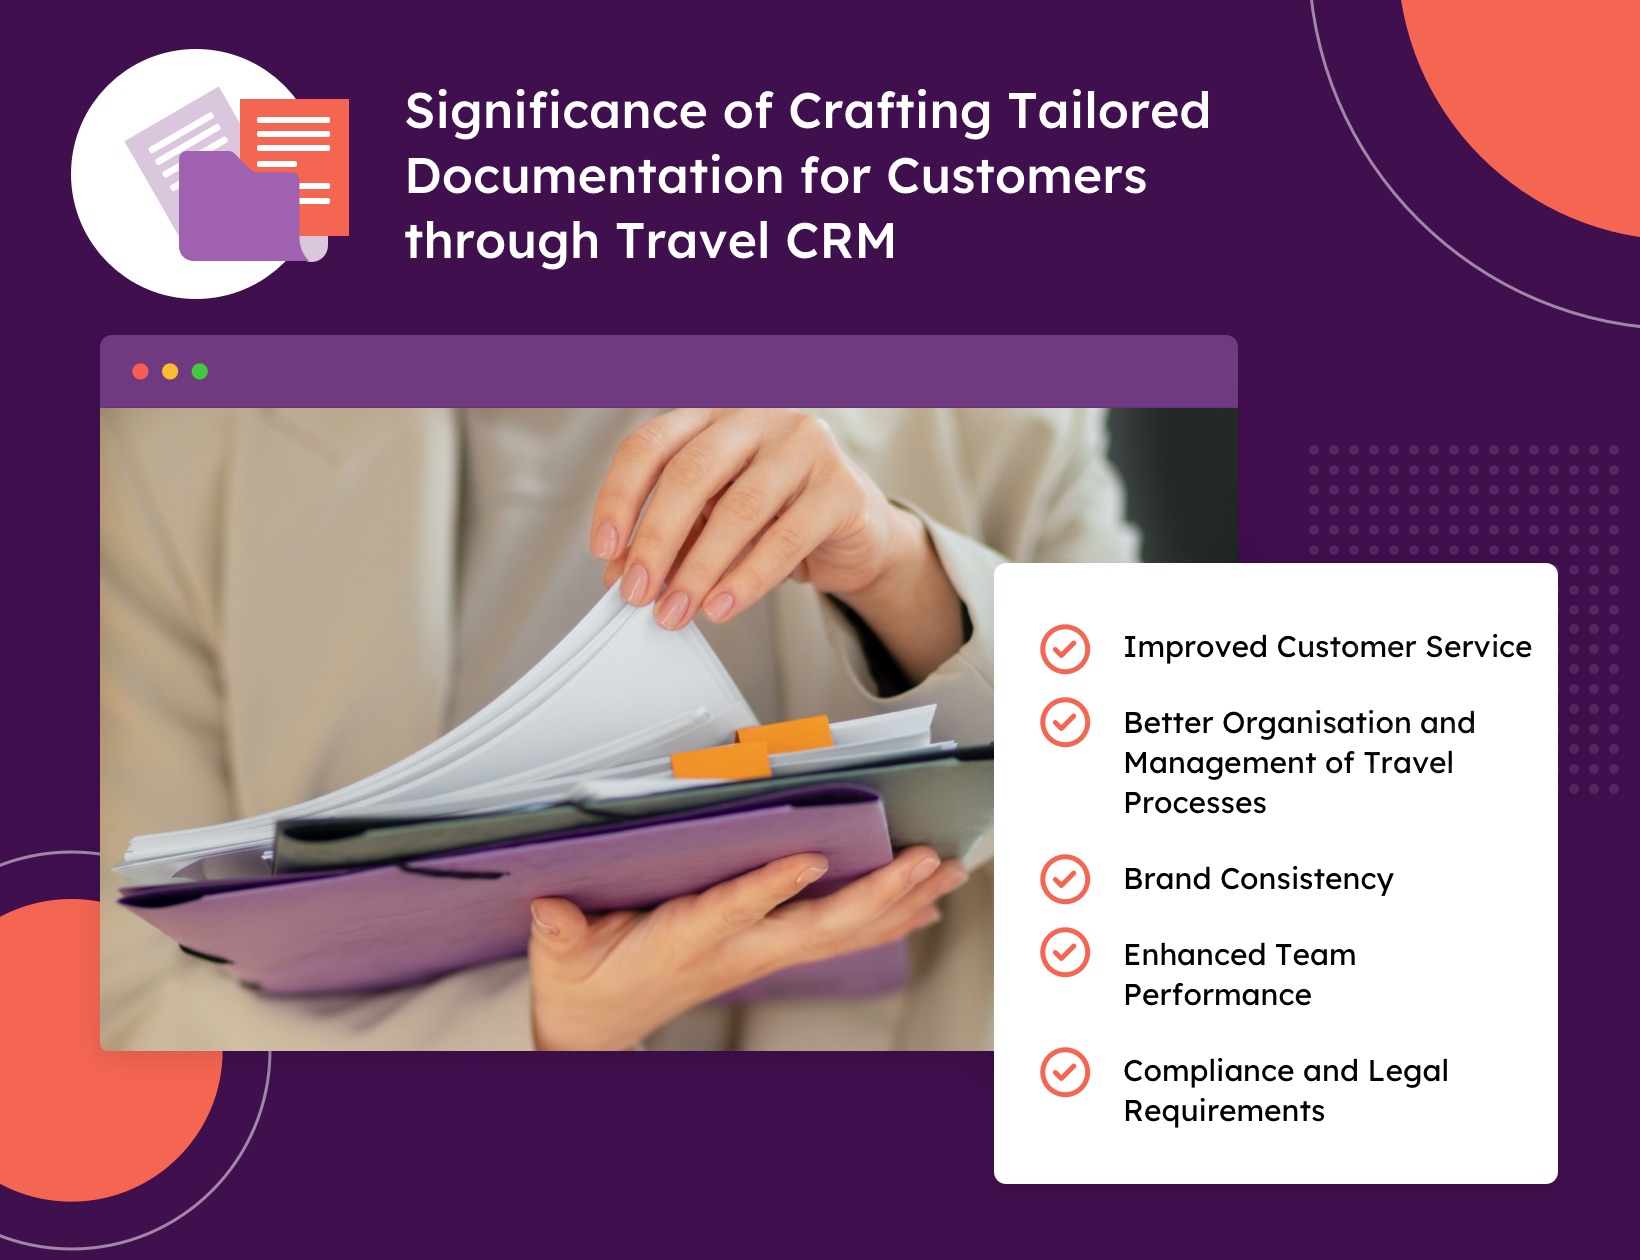 Significance of Crafting Tailored Documentation for Customers through Travel CRM